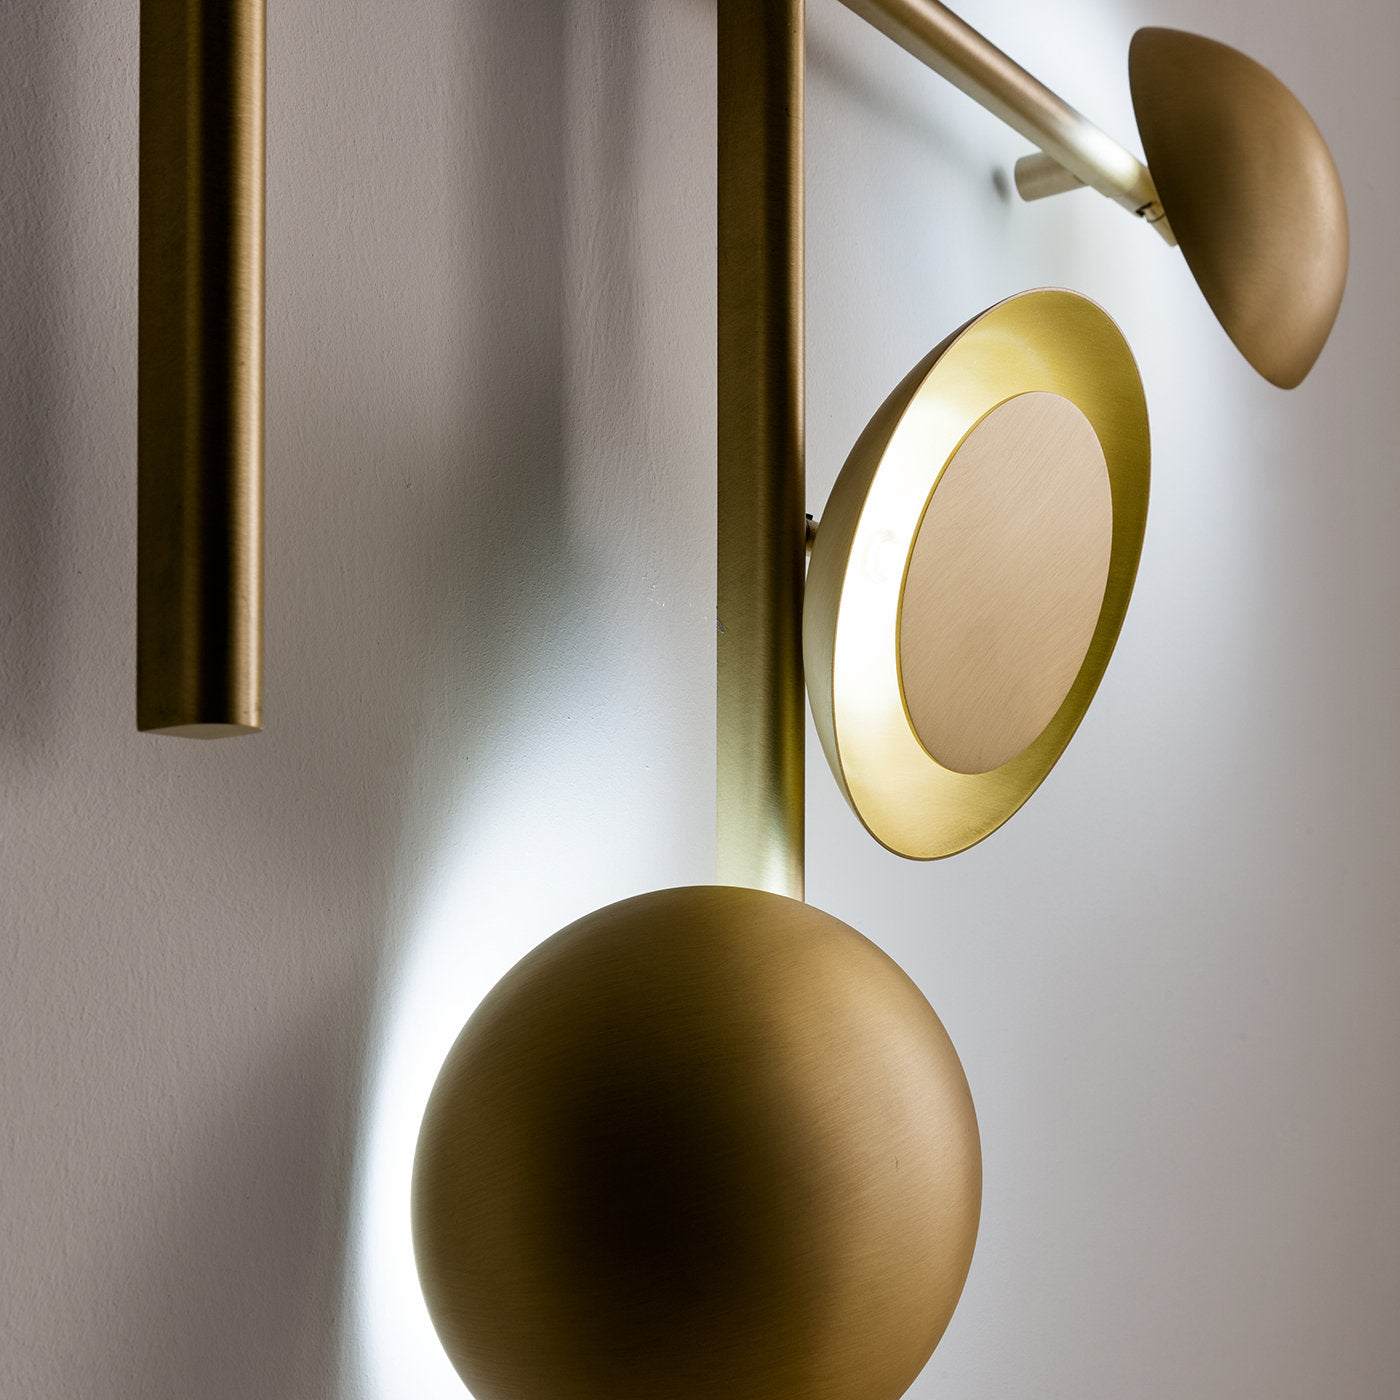 Gaia Large Wall Lamp by Cesare Arosio - Alternative view 1